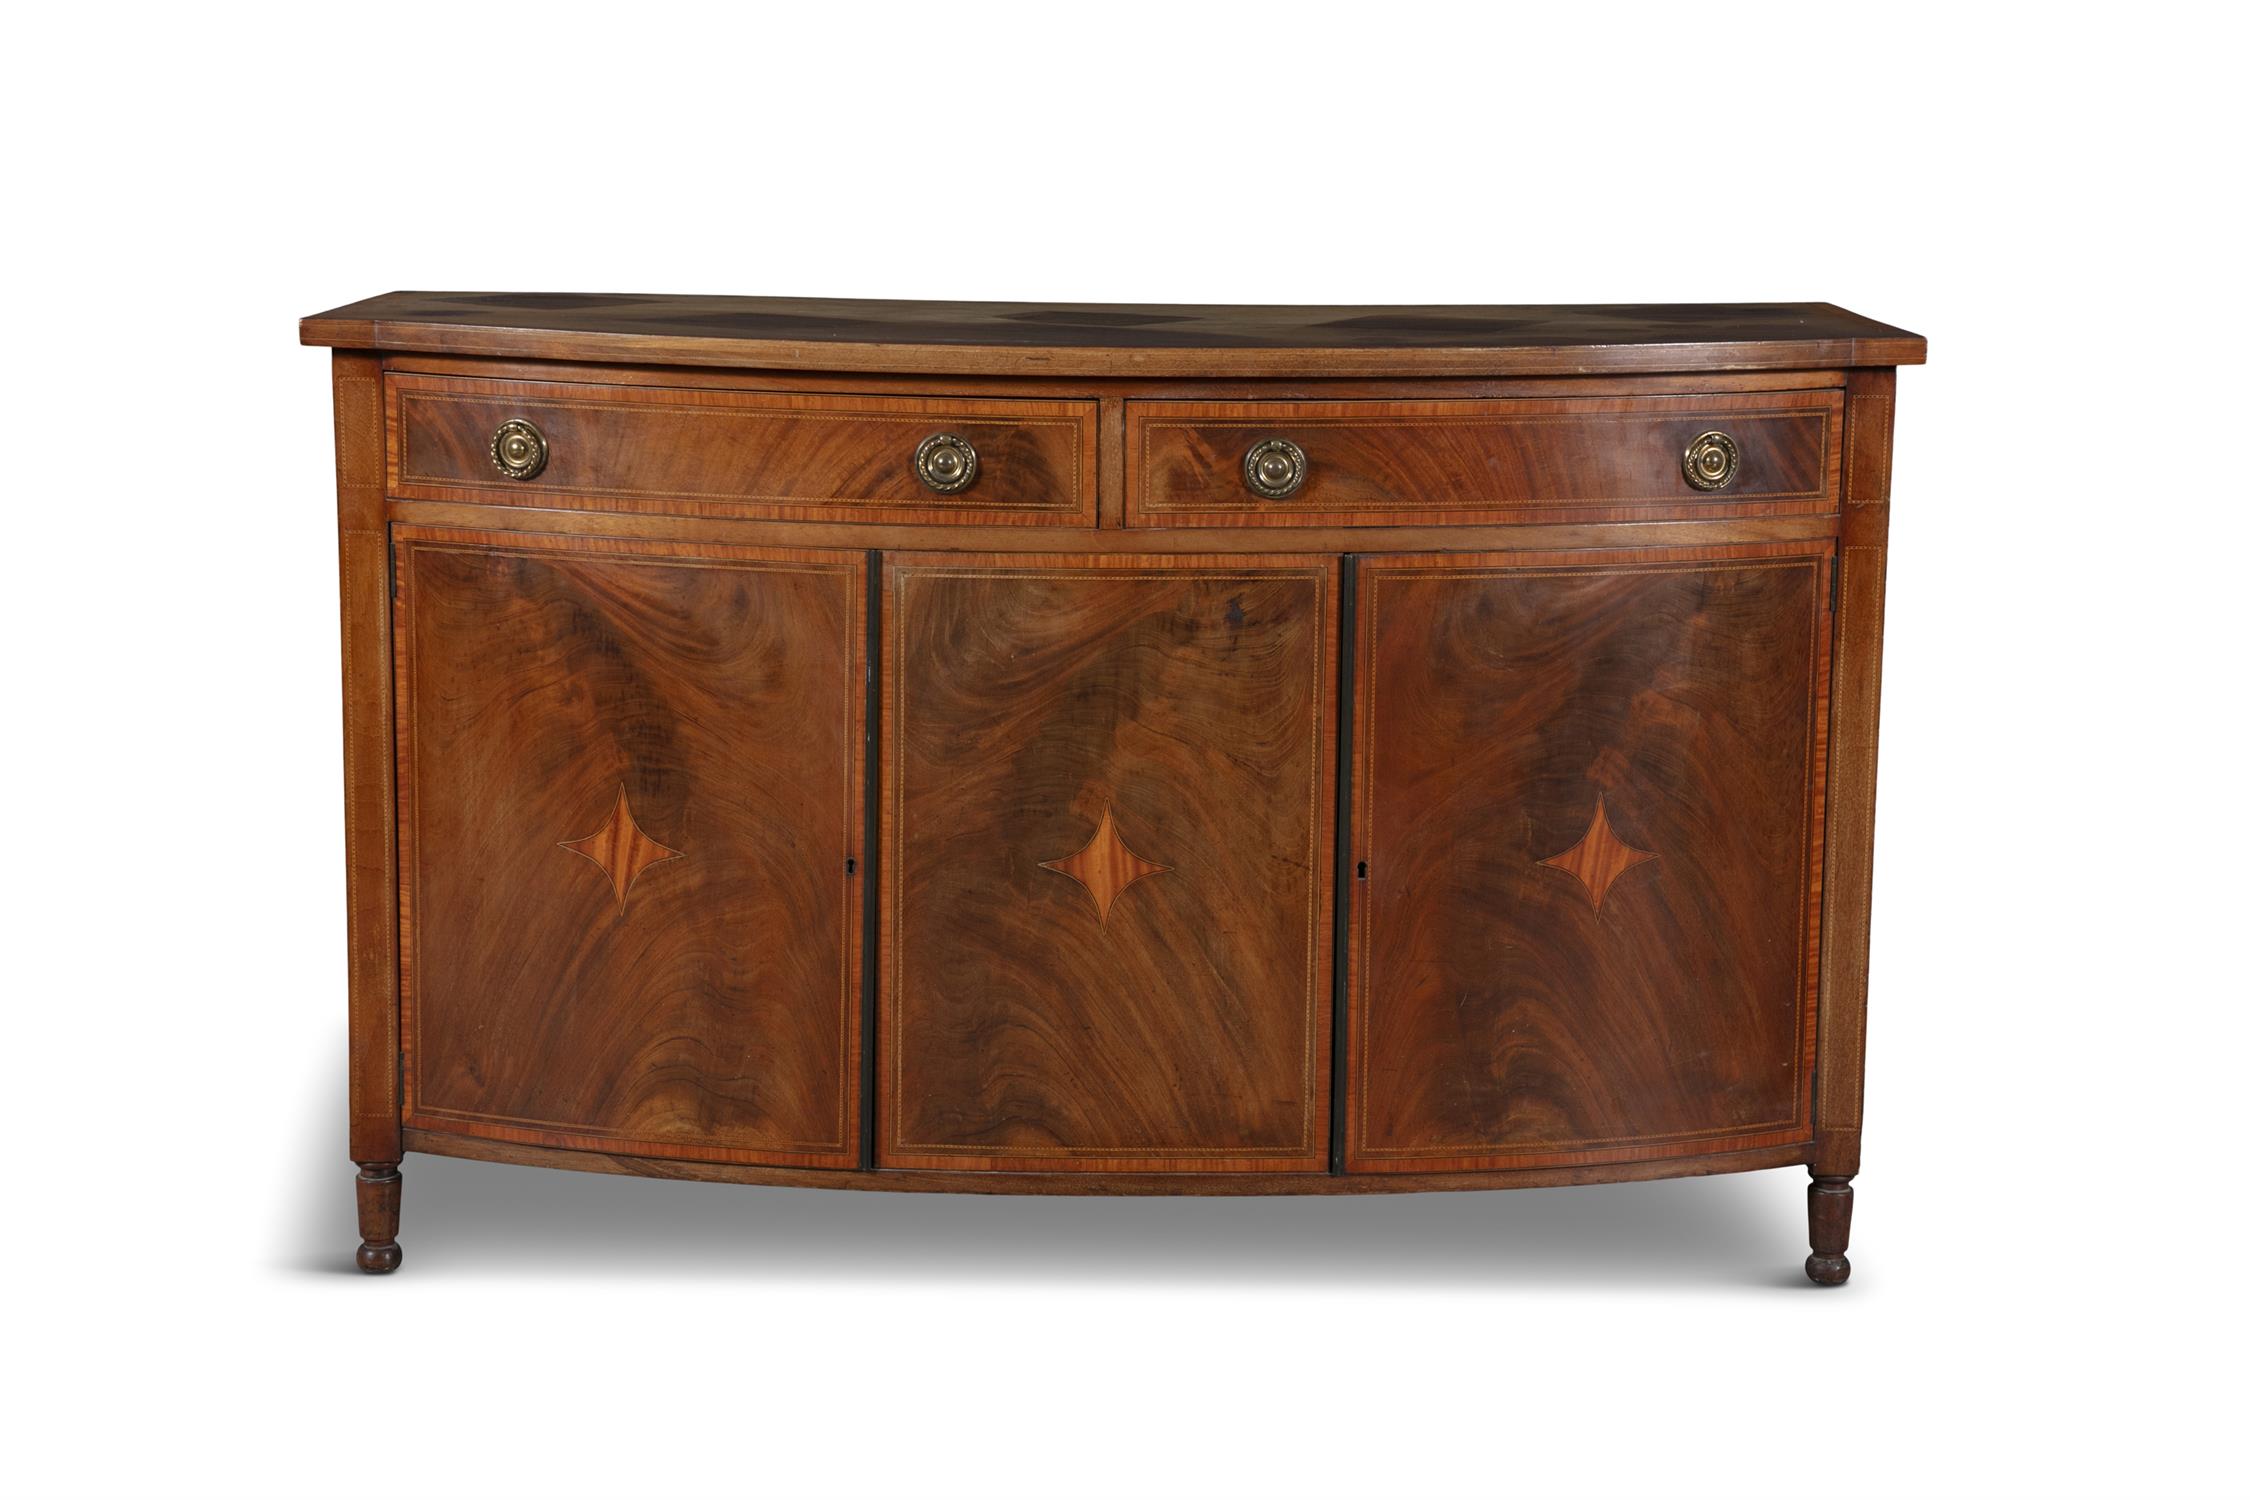 A GEORGE III STYLE MAHOGANY, SATINWOOD AND CROSSBANDED SIDE CABINET, LATE 19TH CENTURY,